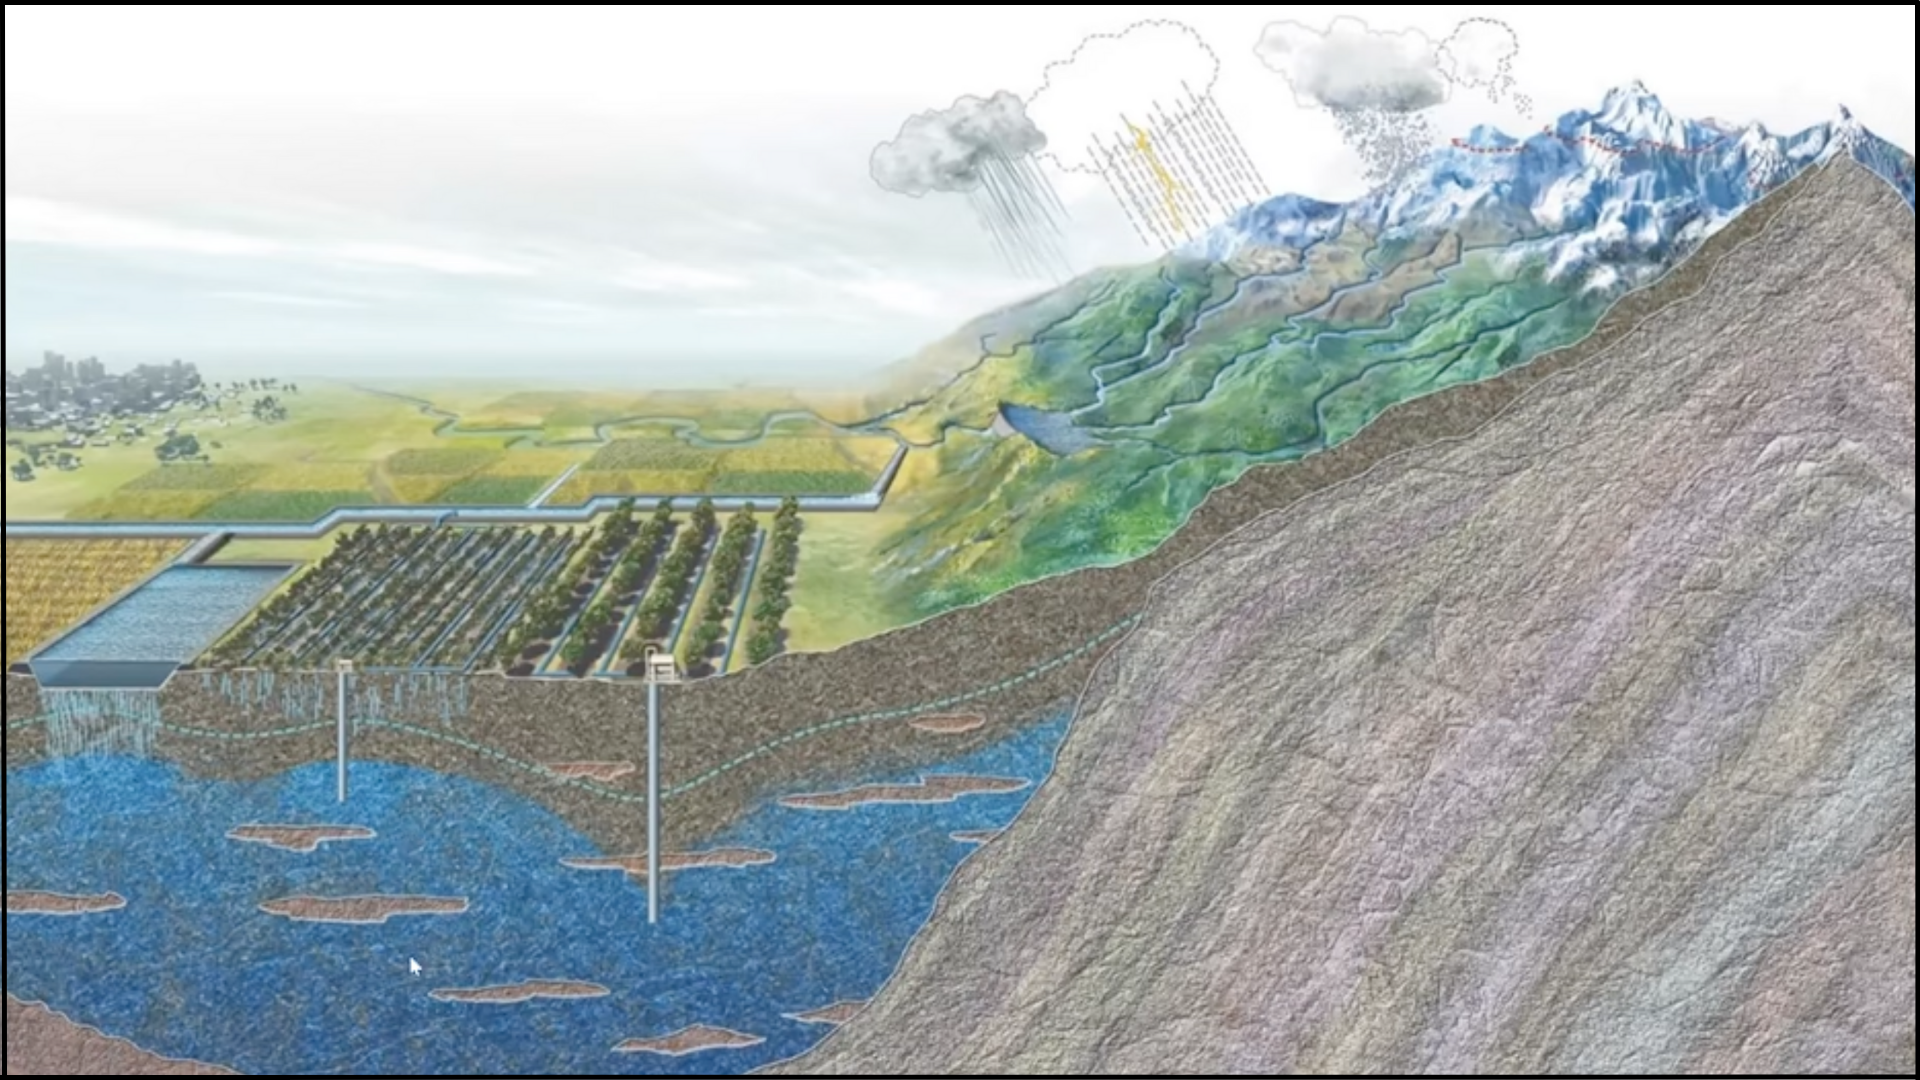 An artist's rendering of a watershed. Against a bright sky, rain clouds deliver snow and water to the side of a mountain, which flows down into agricultural fields that flood and percolate the surface water into illustrated aquifers below.